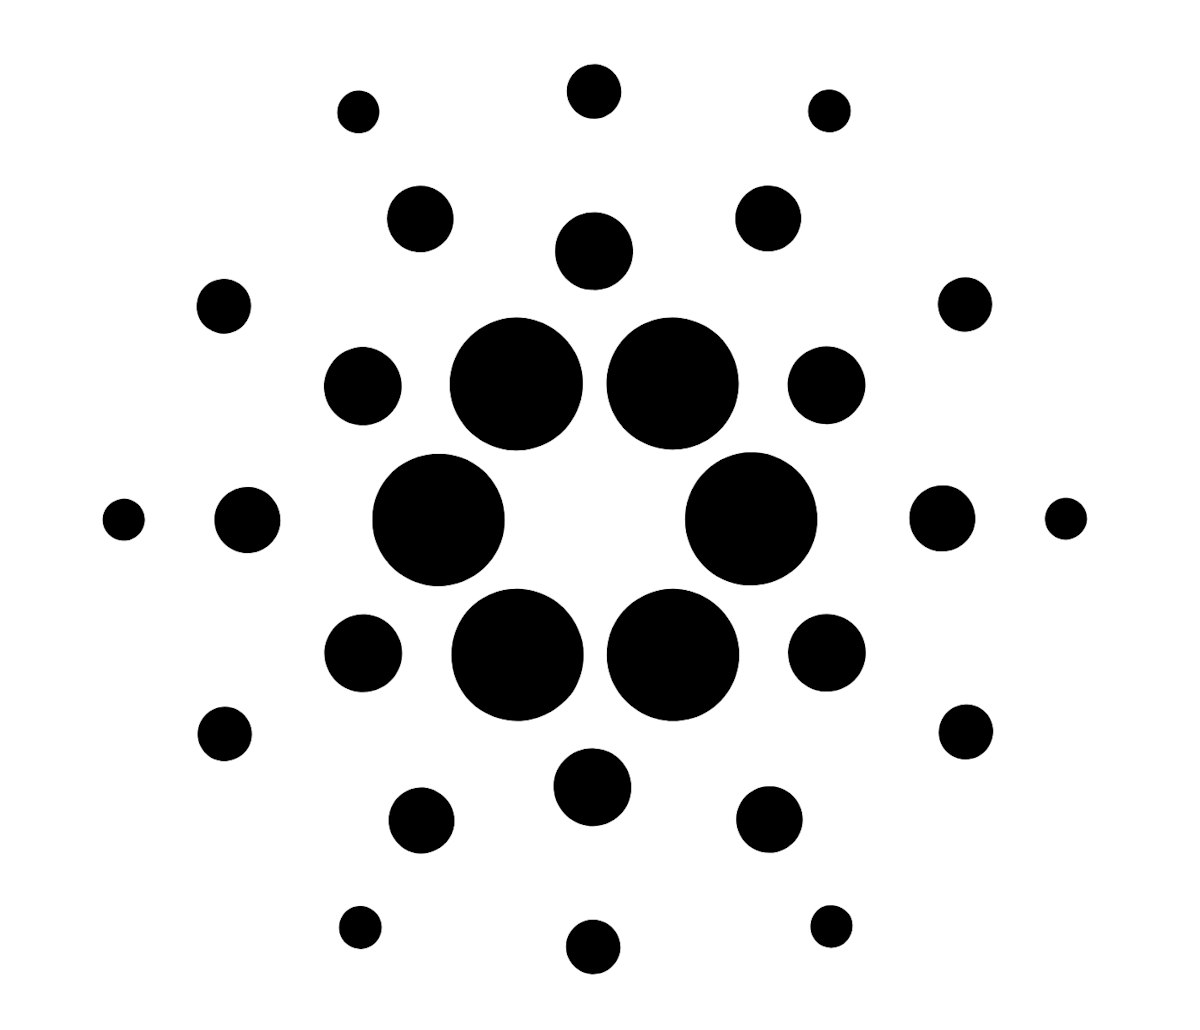 featured image - What’s going on with Cardano?